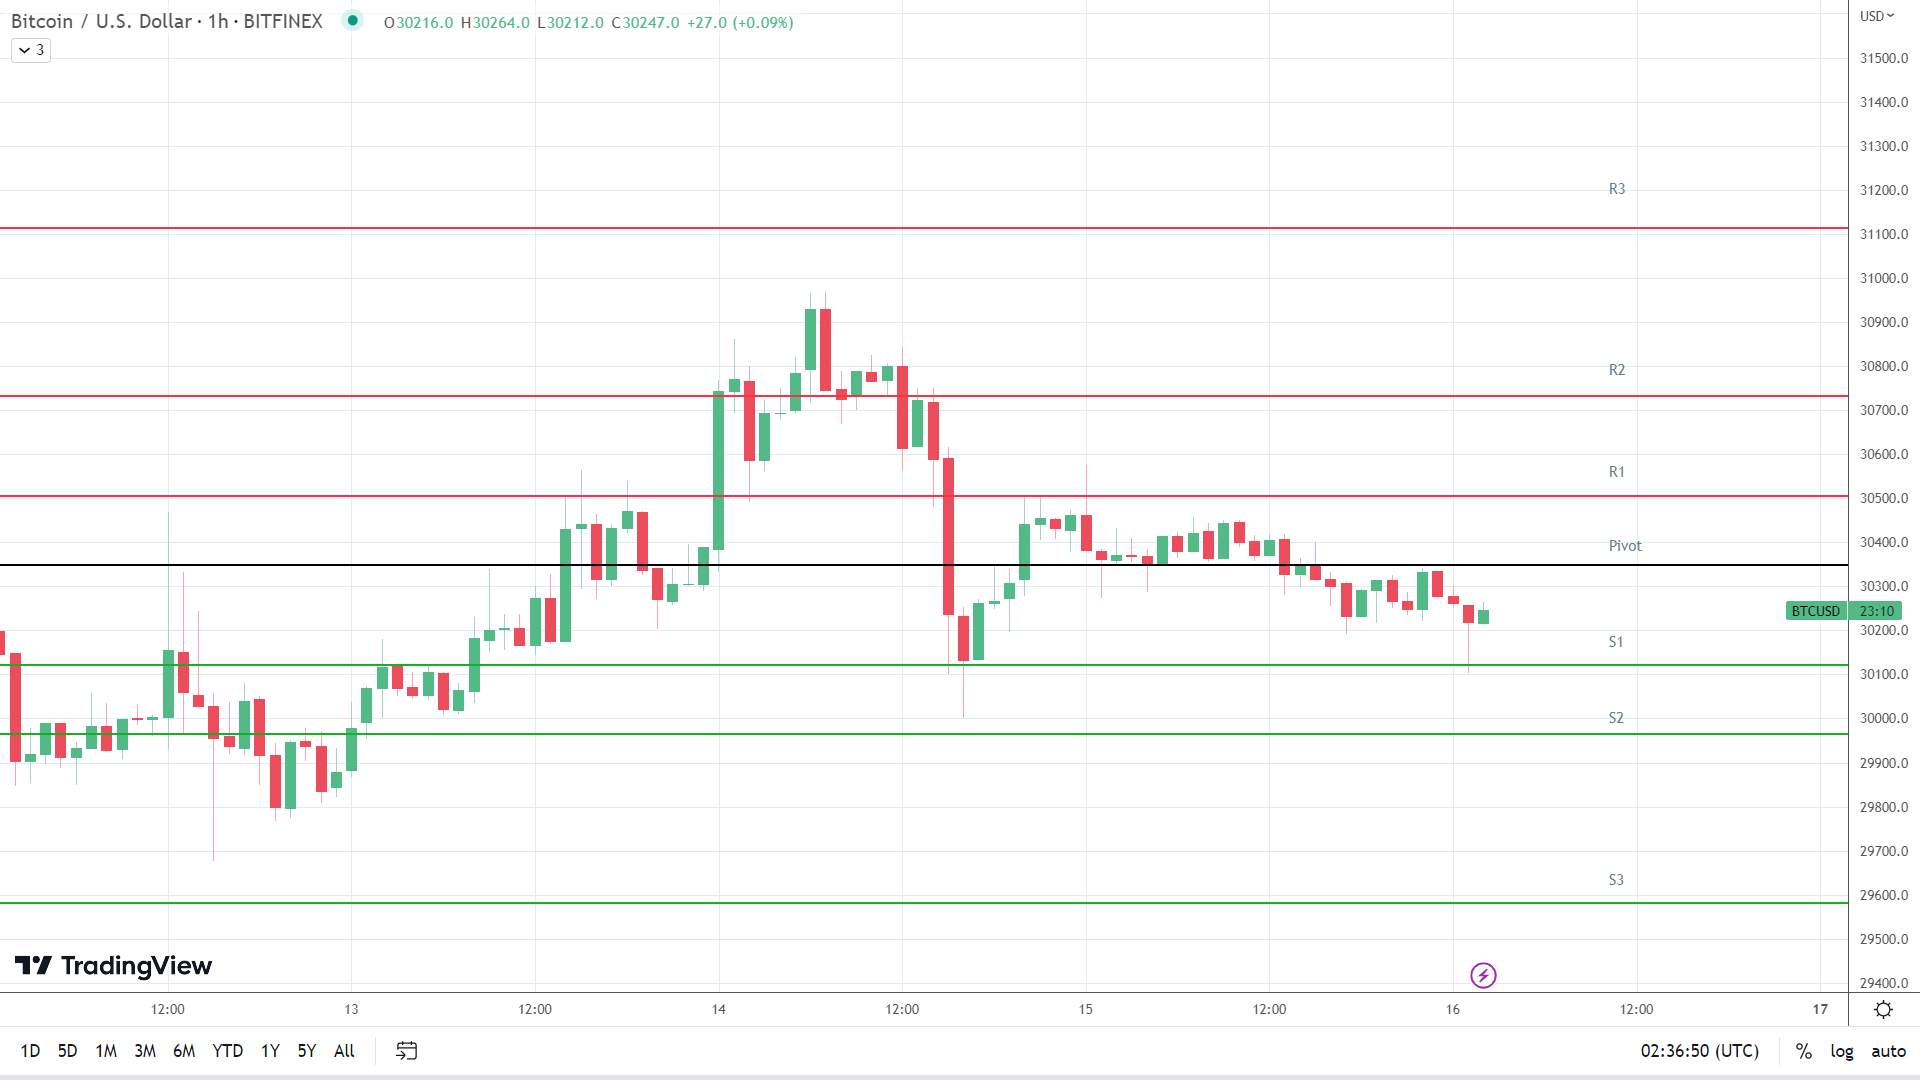 BTC support levels in play early.